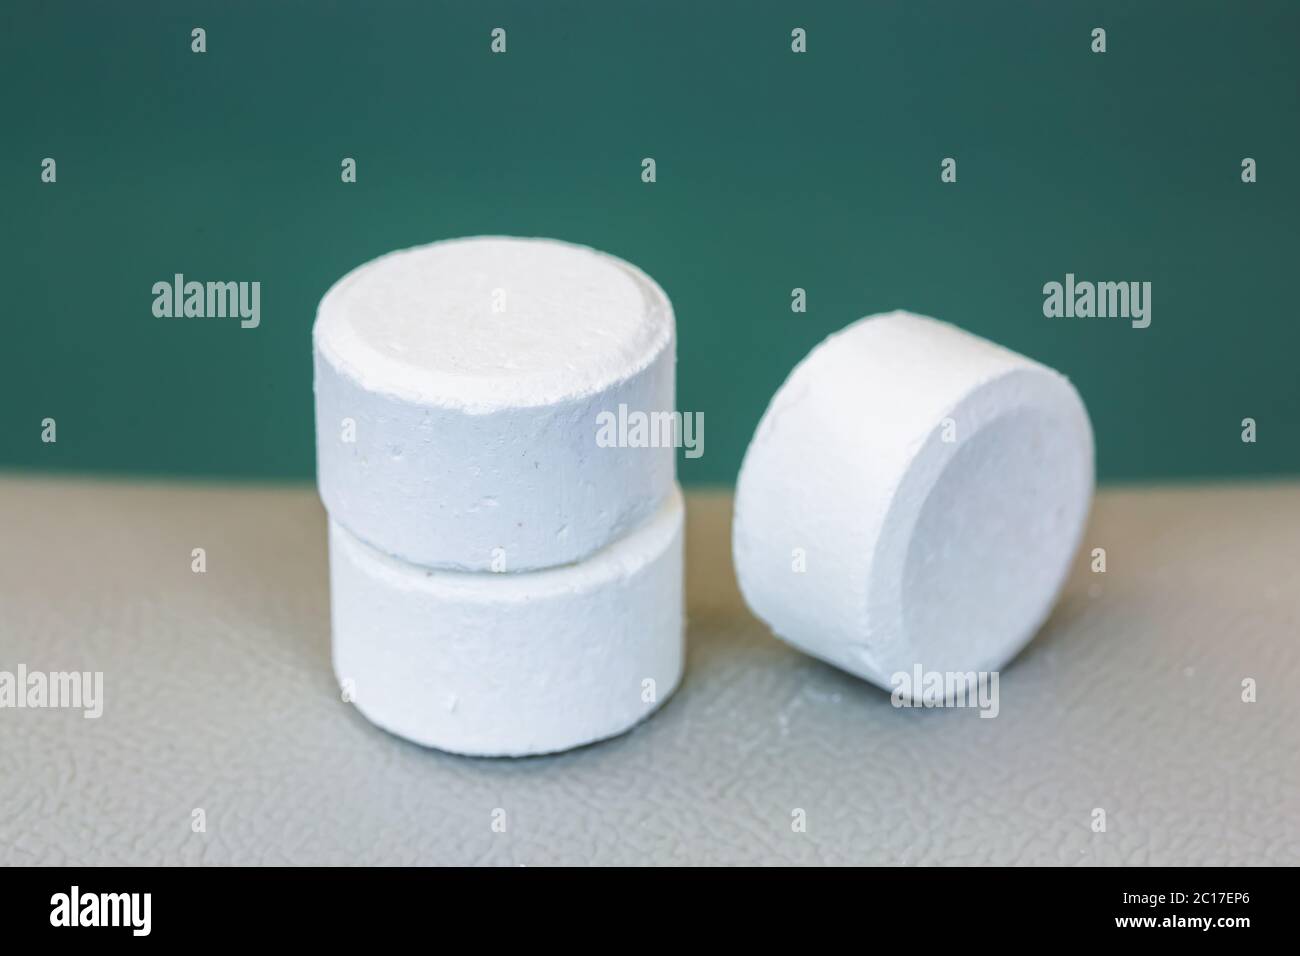 tablet of chlorine or bromide for mainteance of water quality of jacuzzi or spa Stock Photo